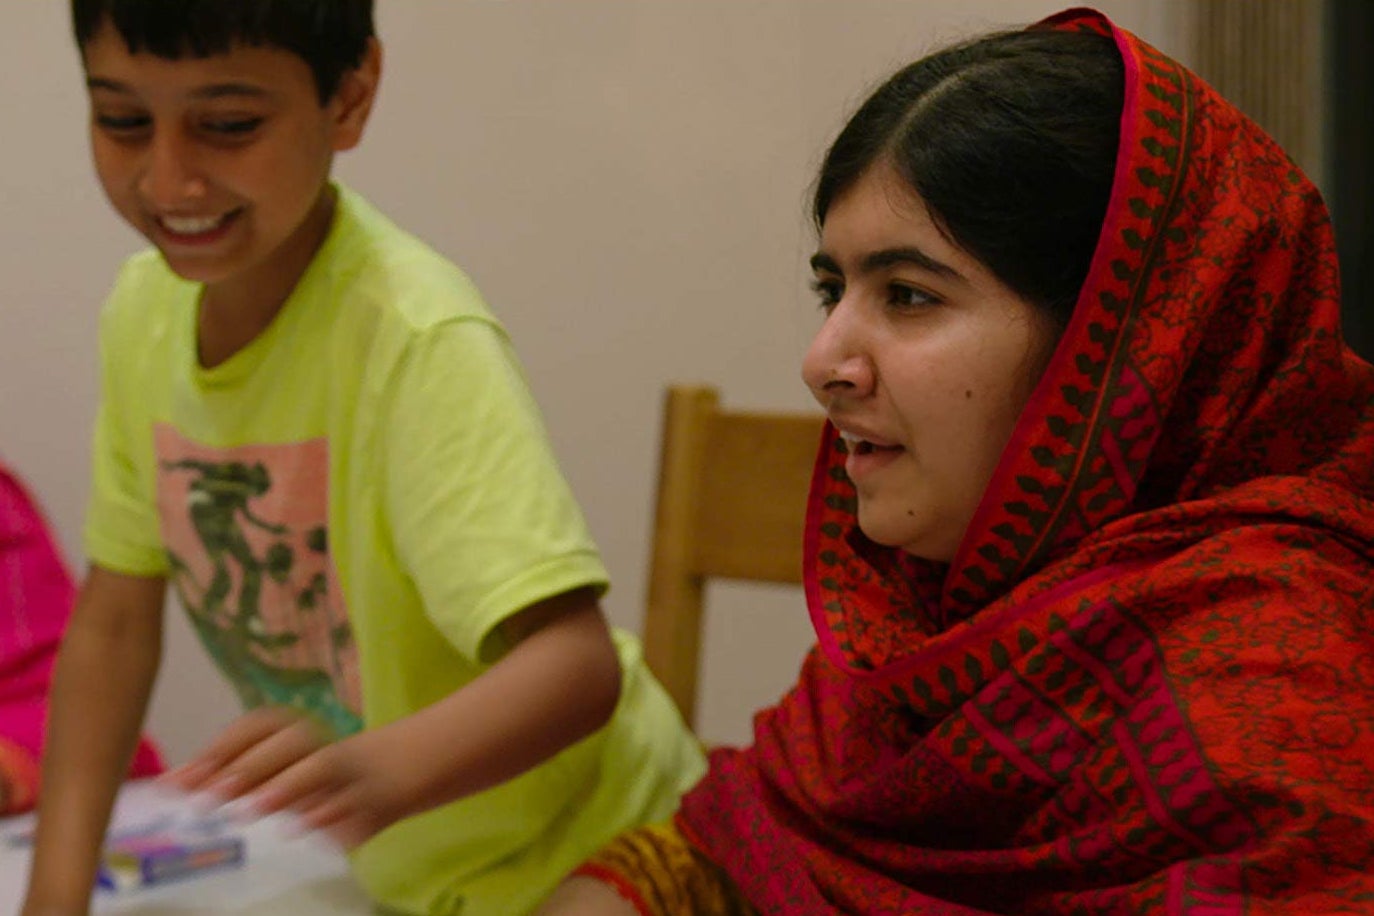 Malala Yousafzai. In the background, a young boy smiles.